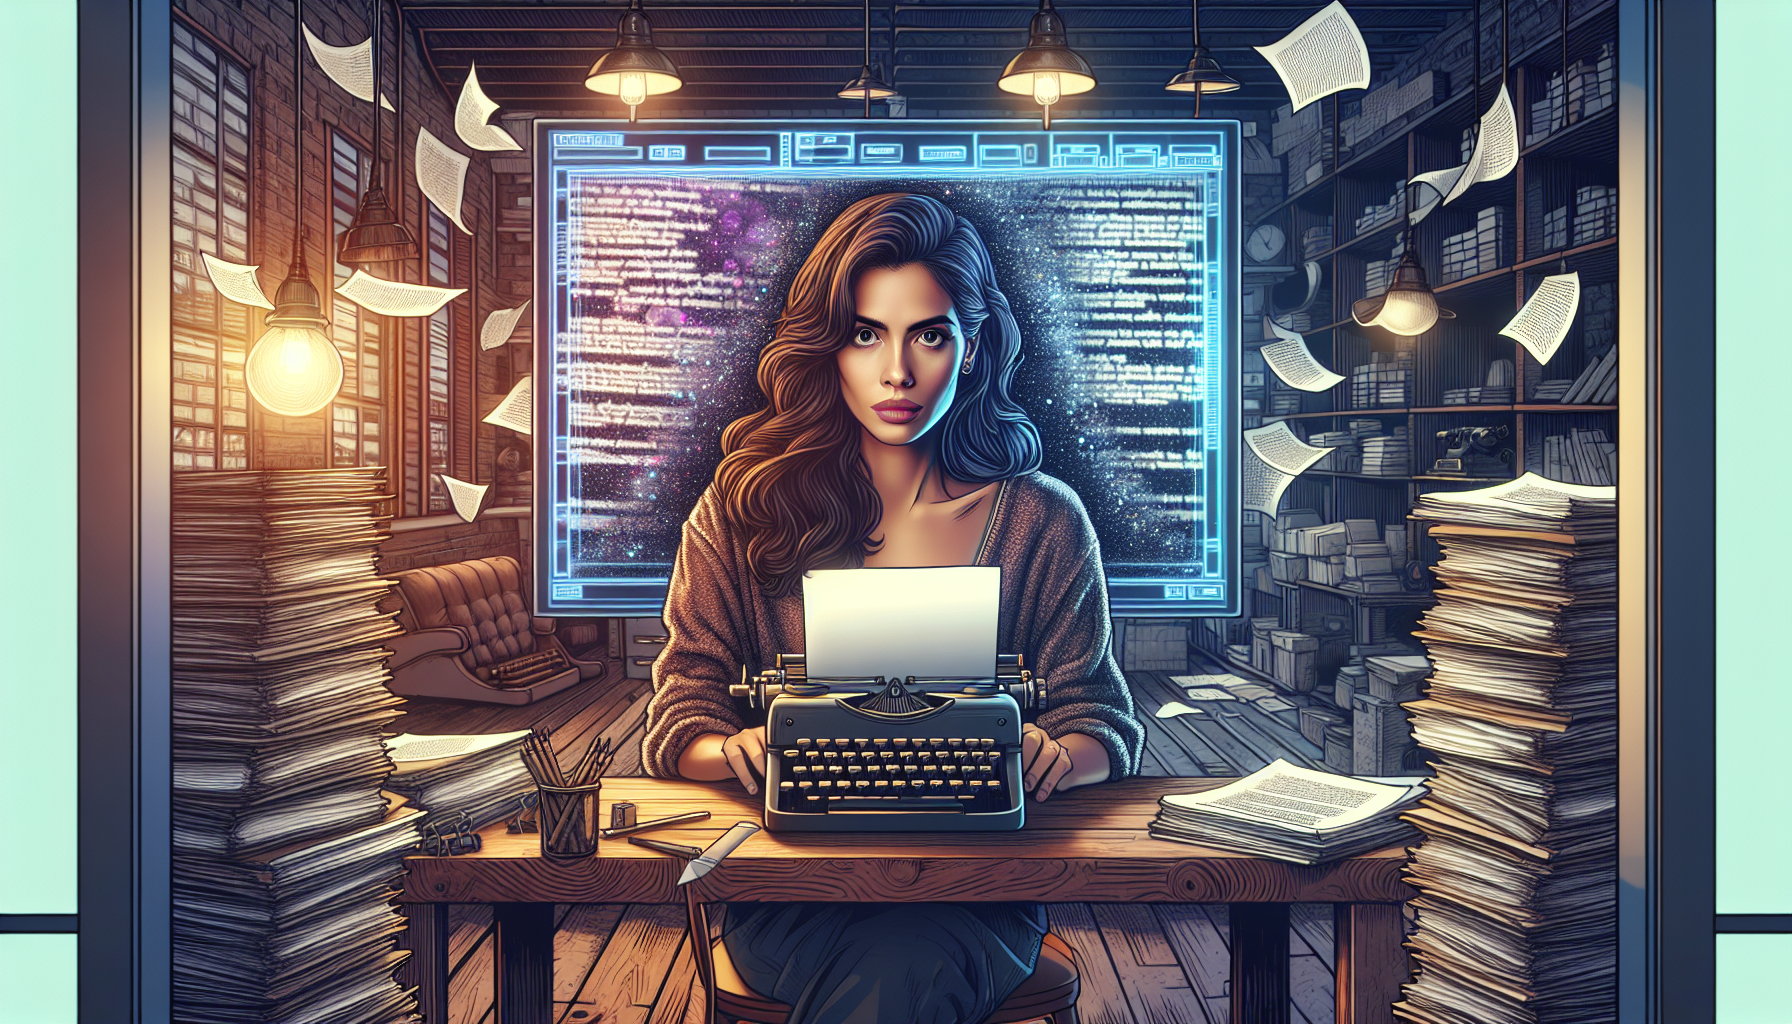 Portrait of a focused female screenwriter, Michaela, sitting in a cozy, well-lit studio surrounded by stacks of scripts and a vintage typewriter, her gaze intently fixed on a floating digital screen d